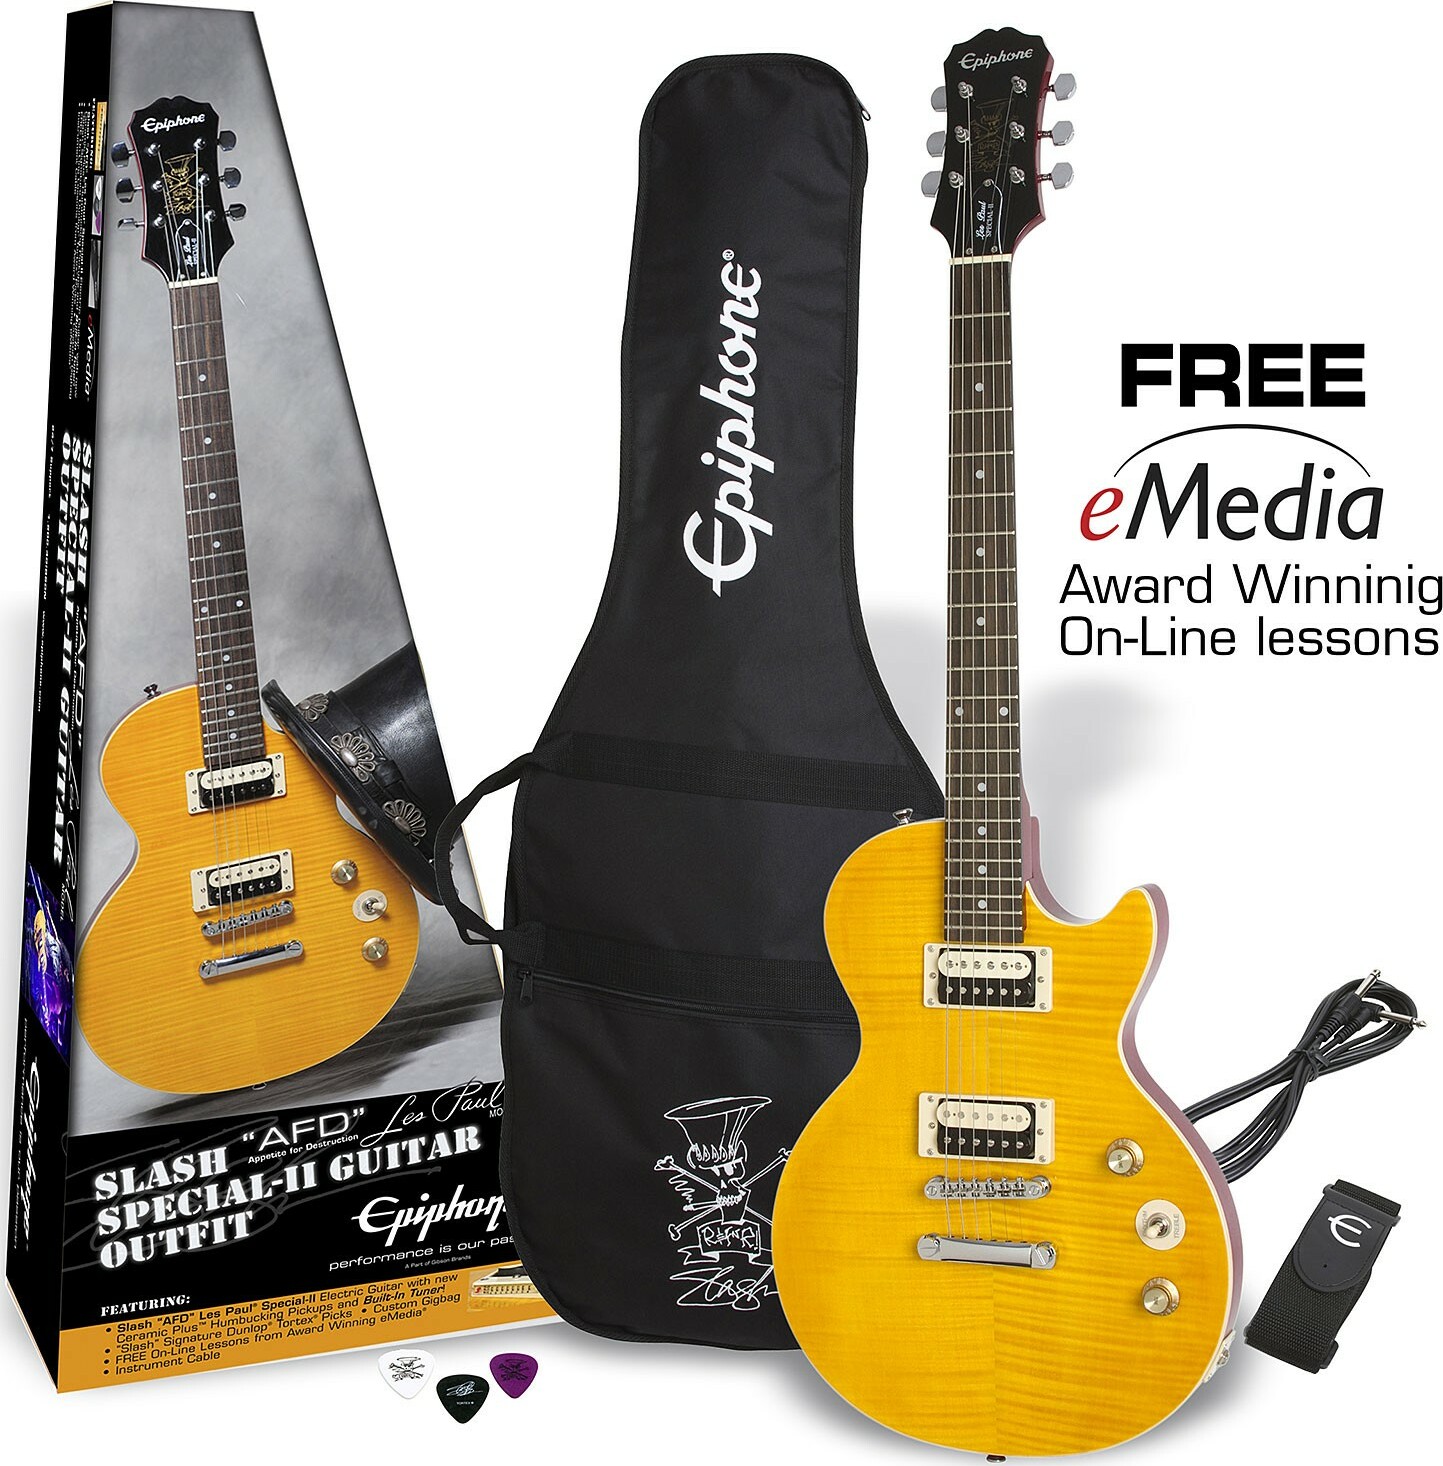 Epiphone Les Paul Slash Special Ii Afd Guitar Outfit - Appetite Amber - Electric guitar set - Main picture